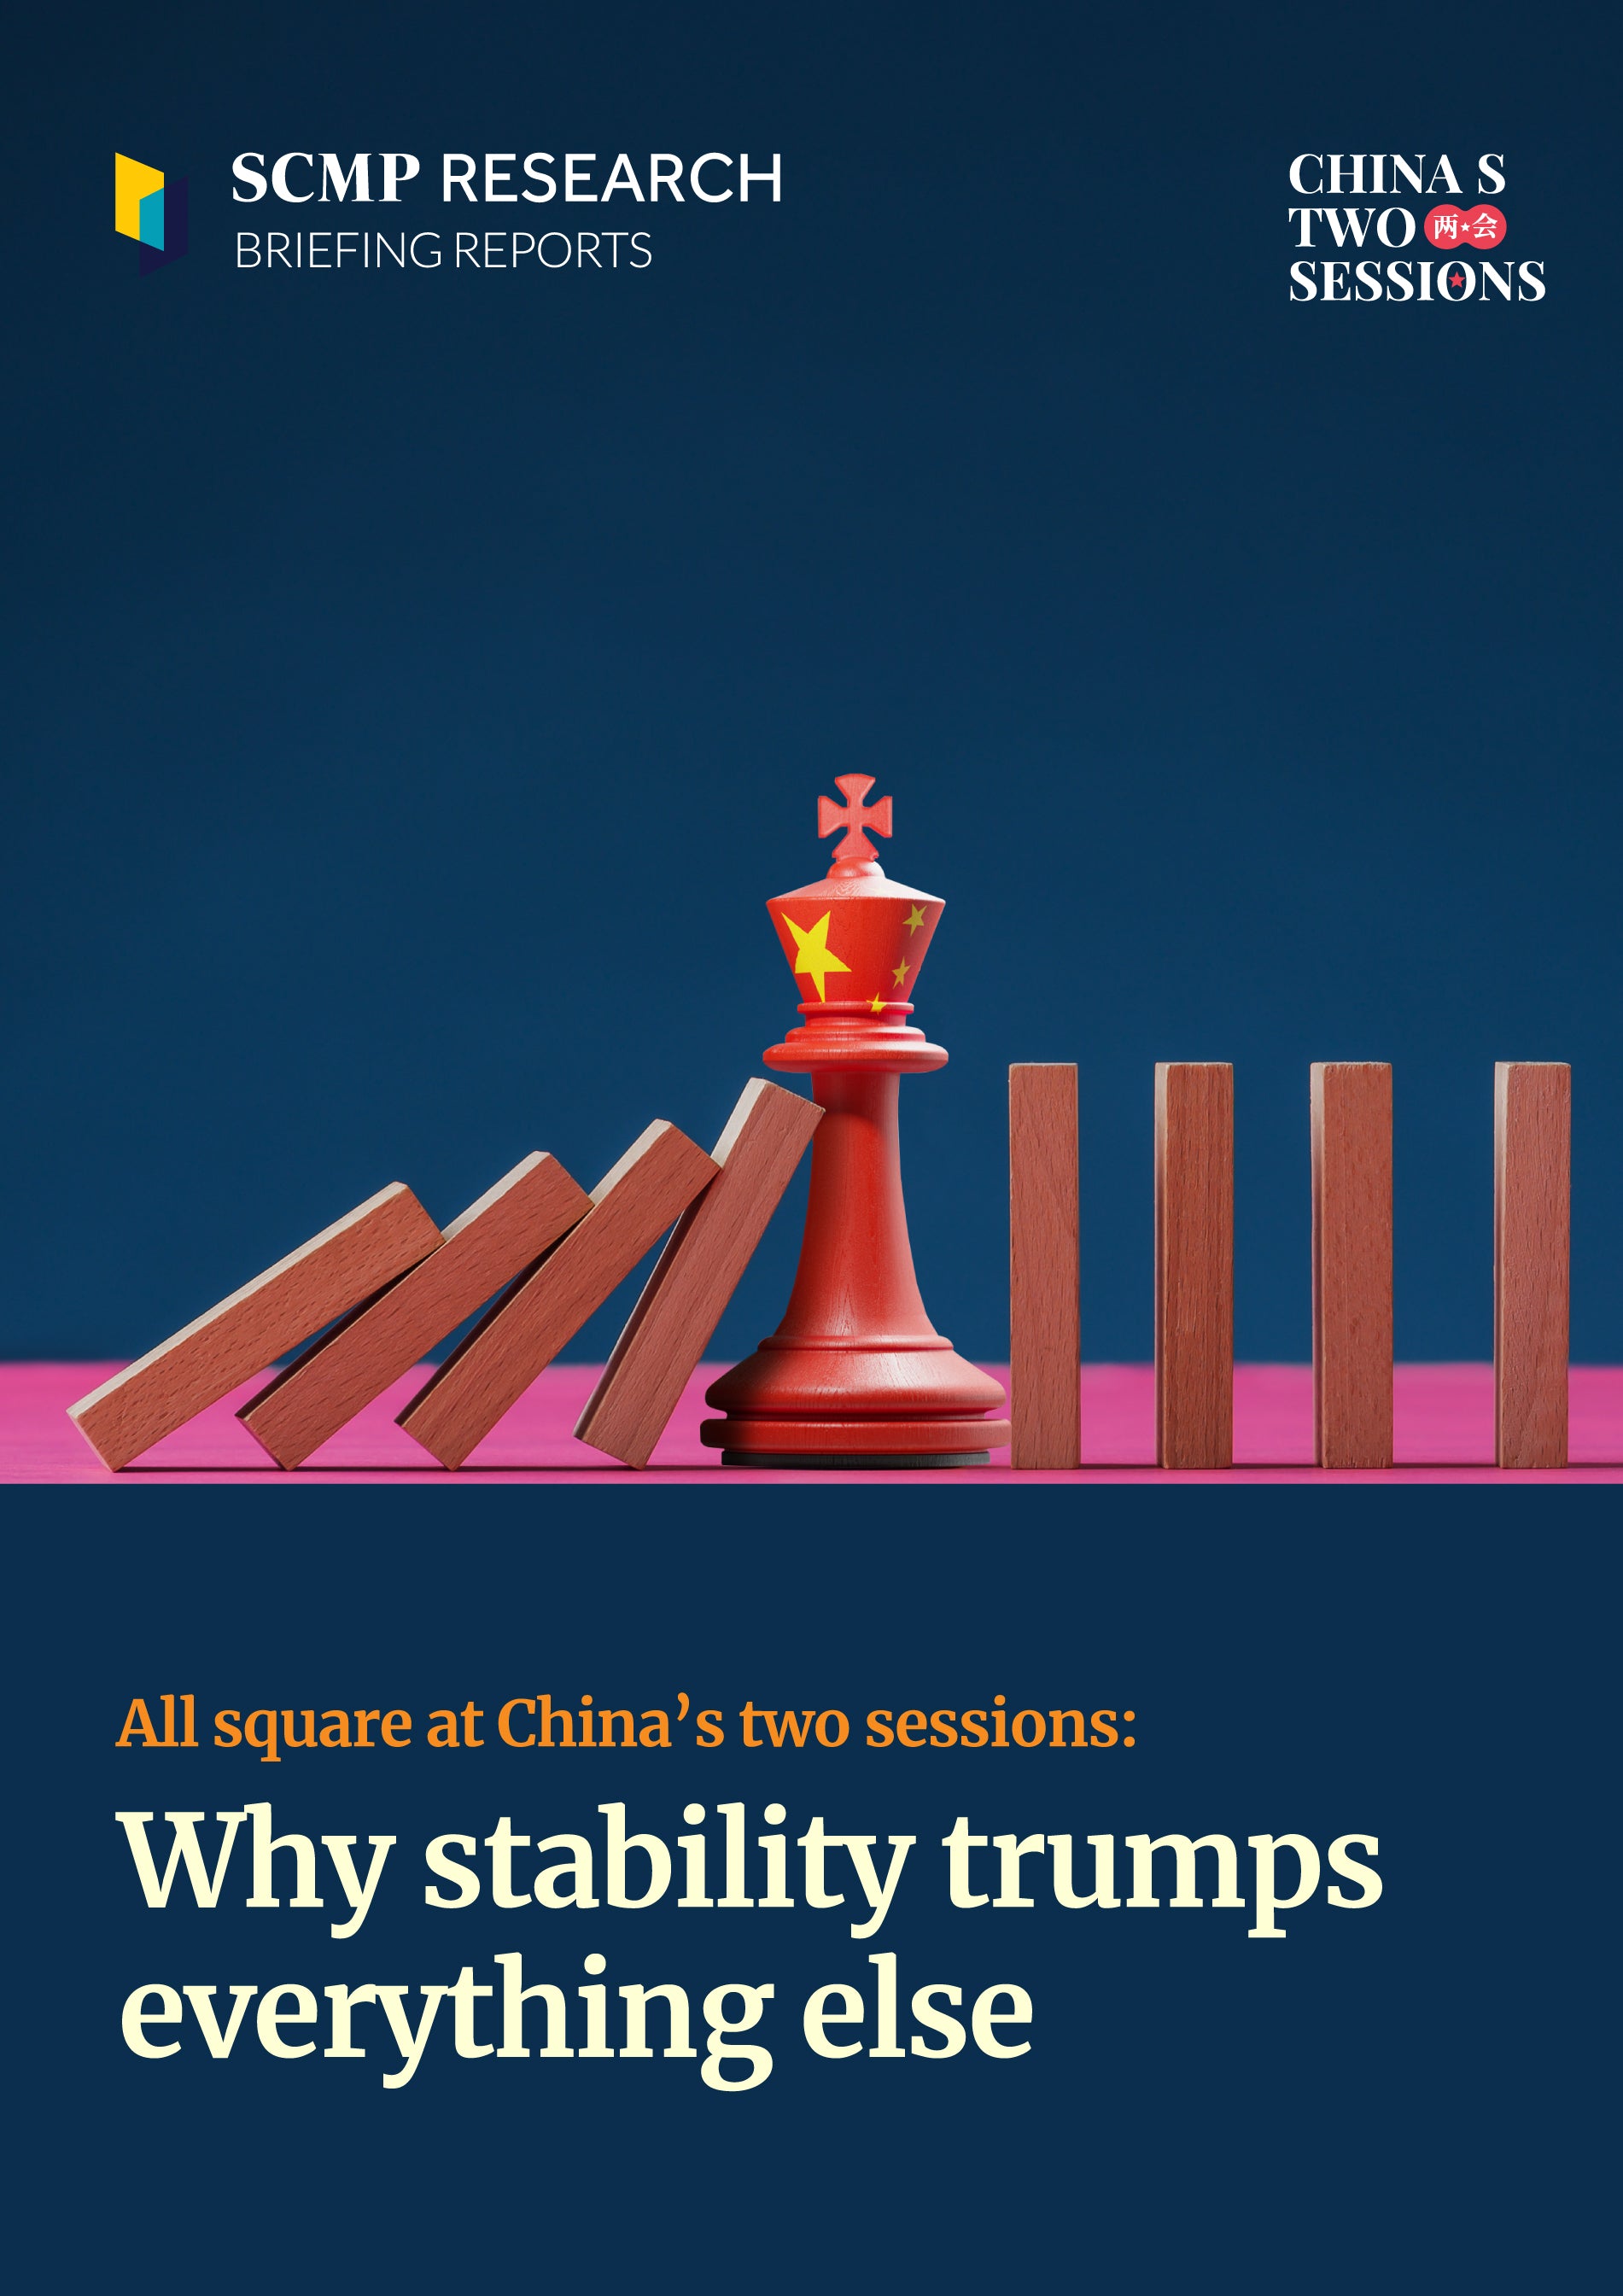 All square at China’s two sessions: why stability trumps everything else